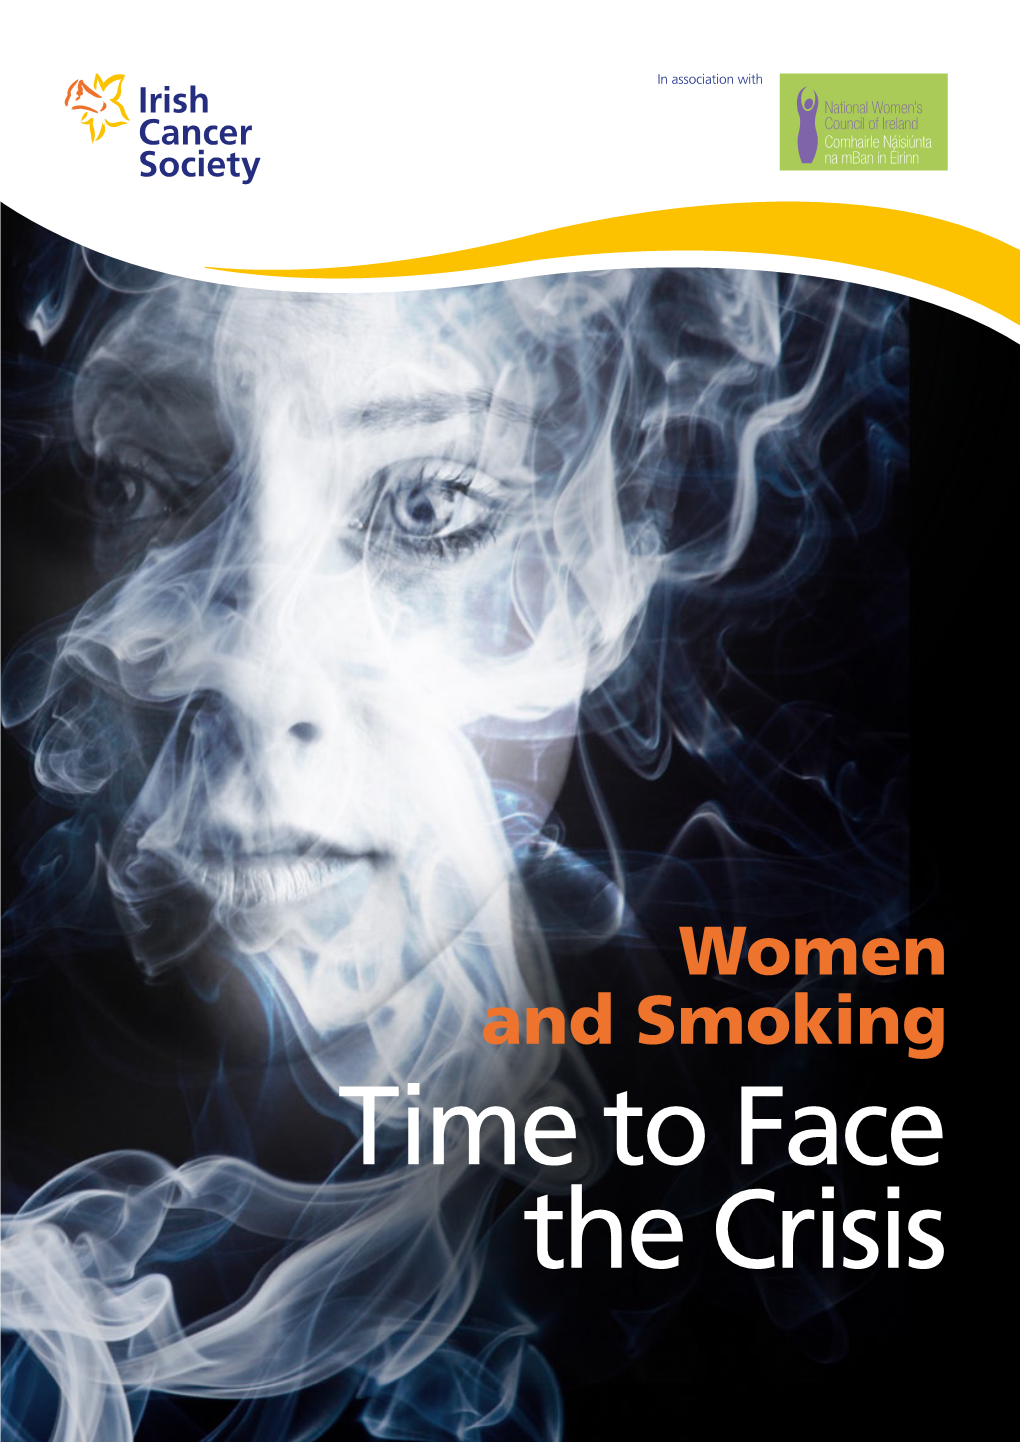 Women and Smoking: Time to Face the Crisis, Is Our First Major Response